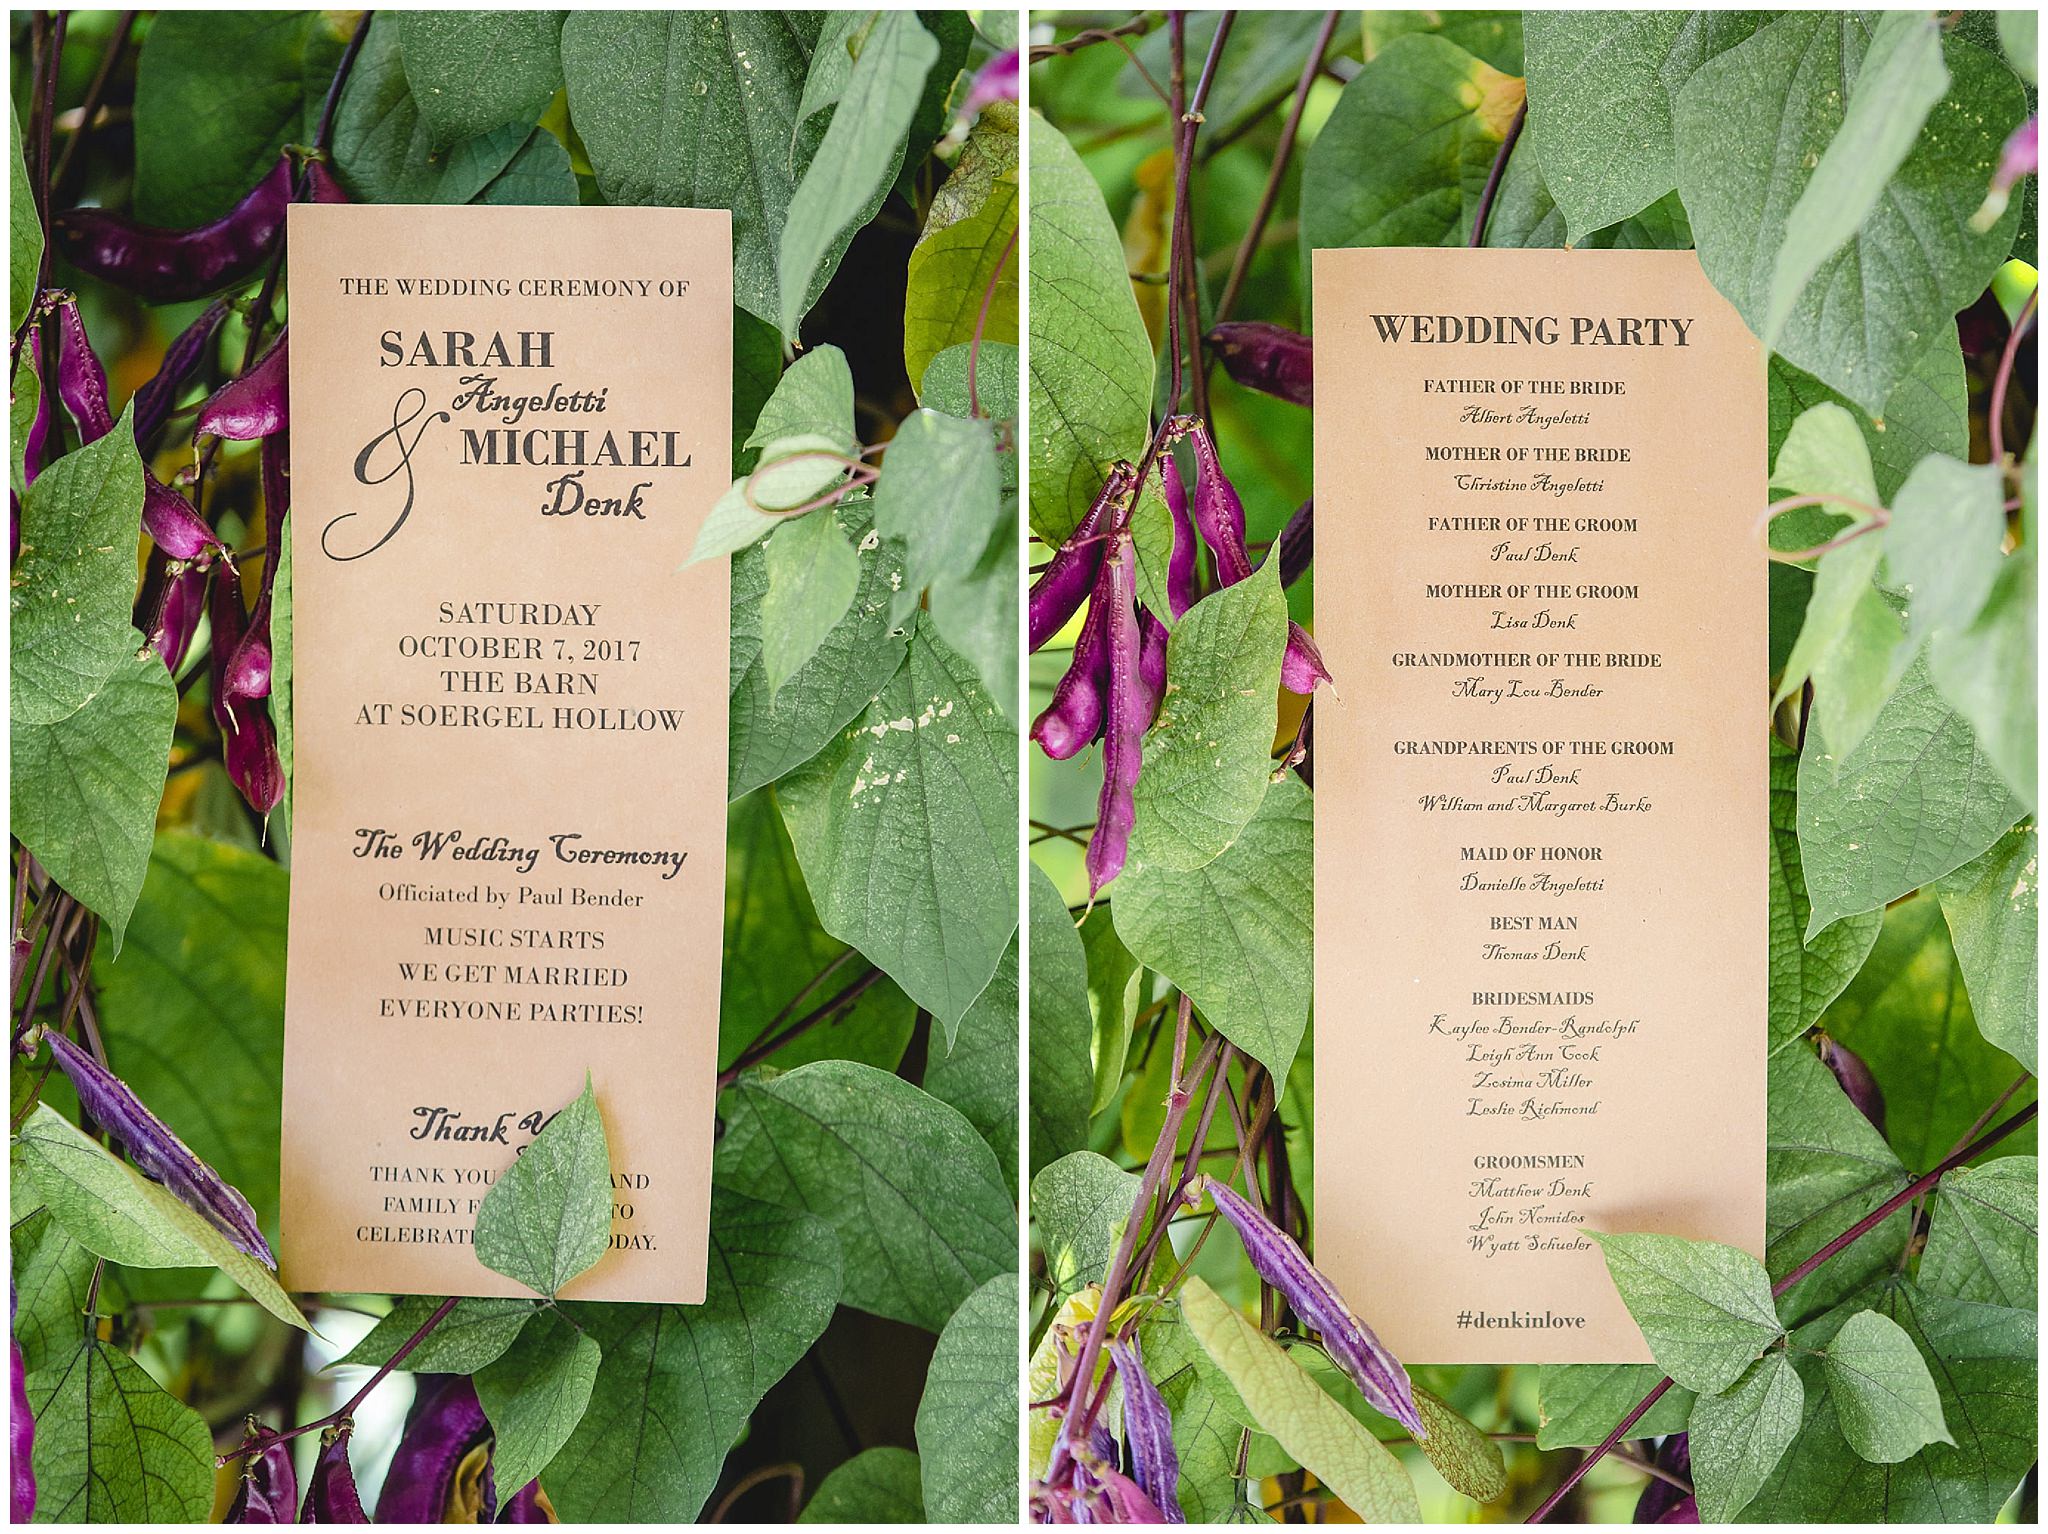 Programs for a wedding ceremony at the Barn at Soergel Hollow